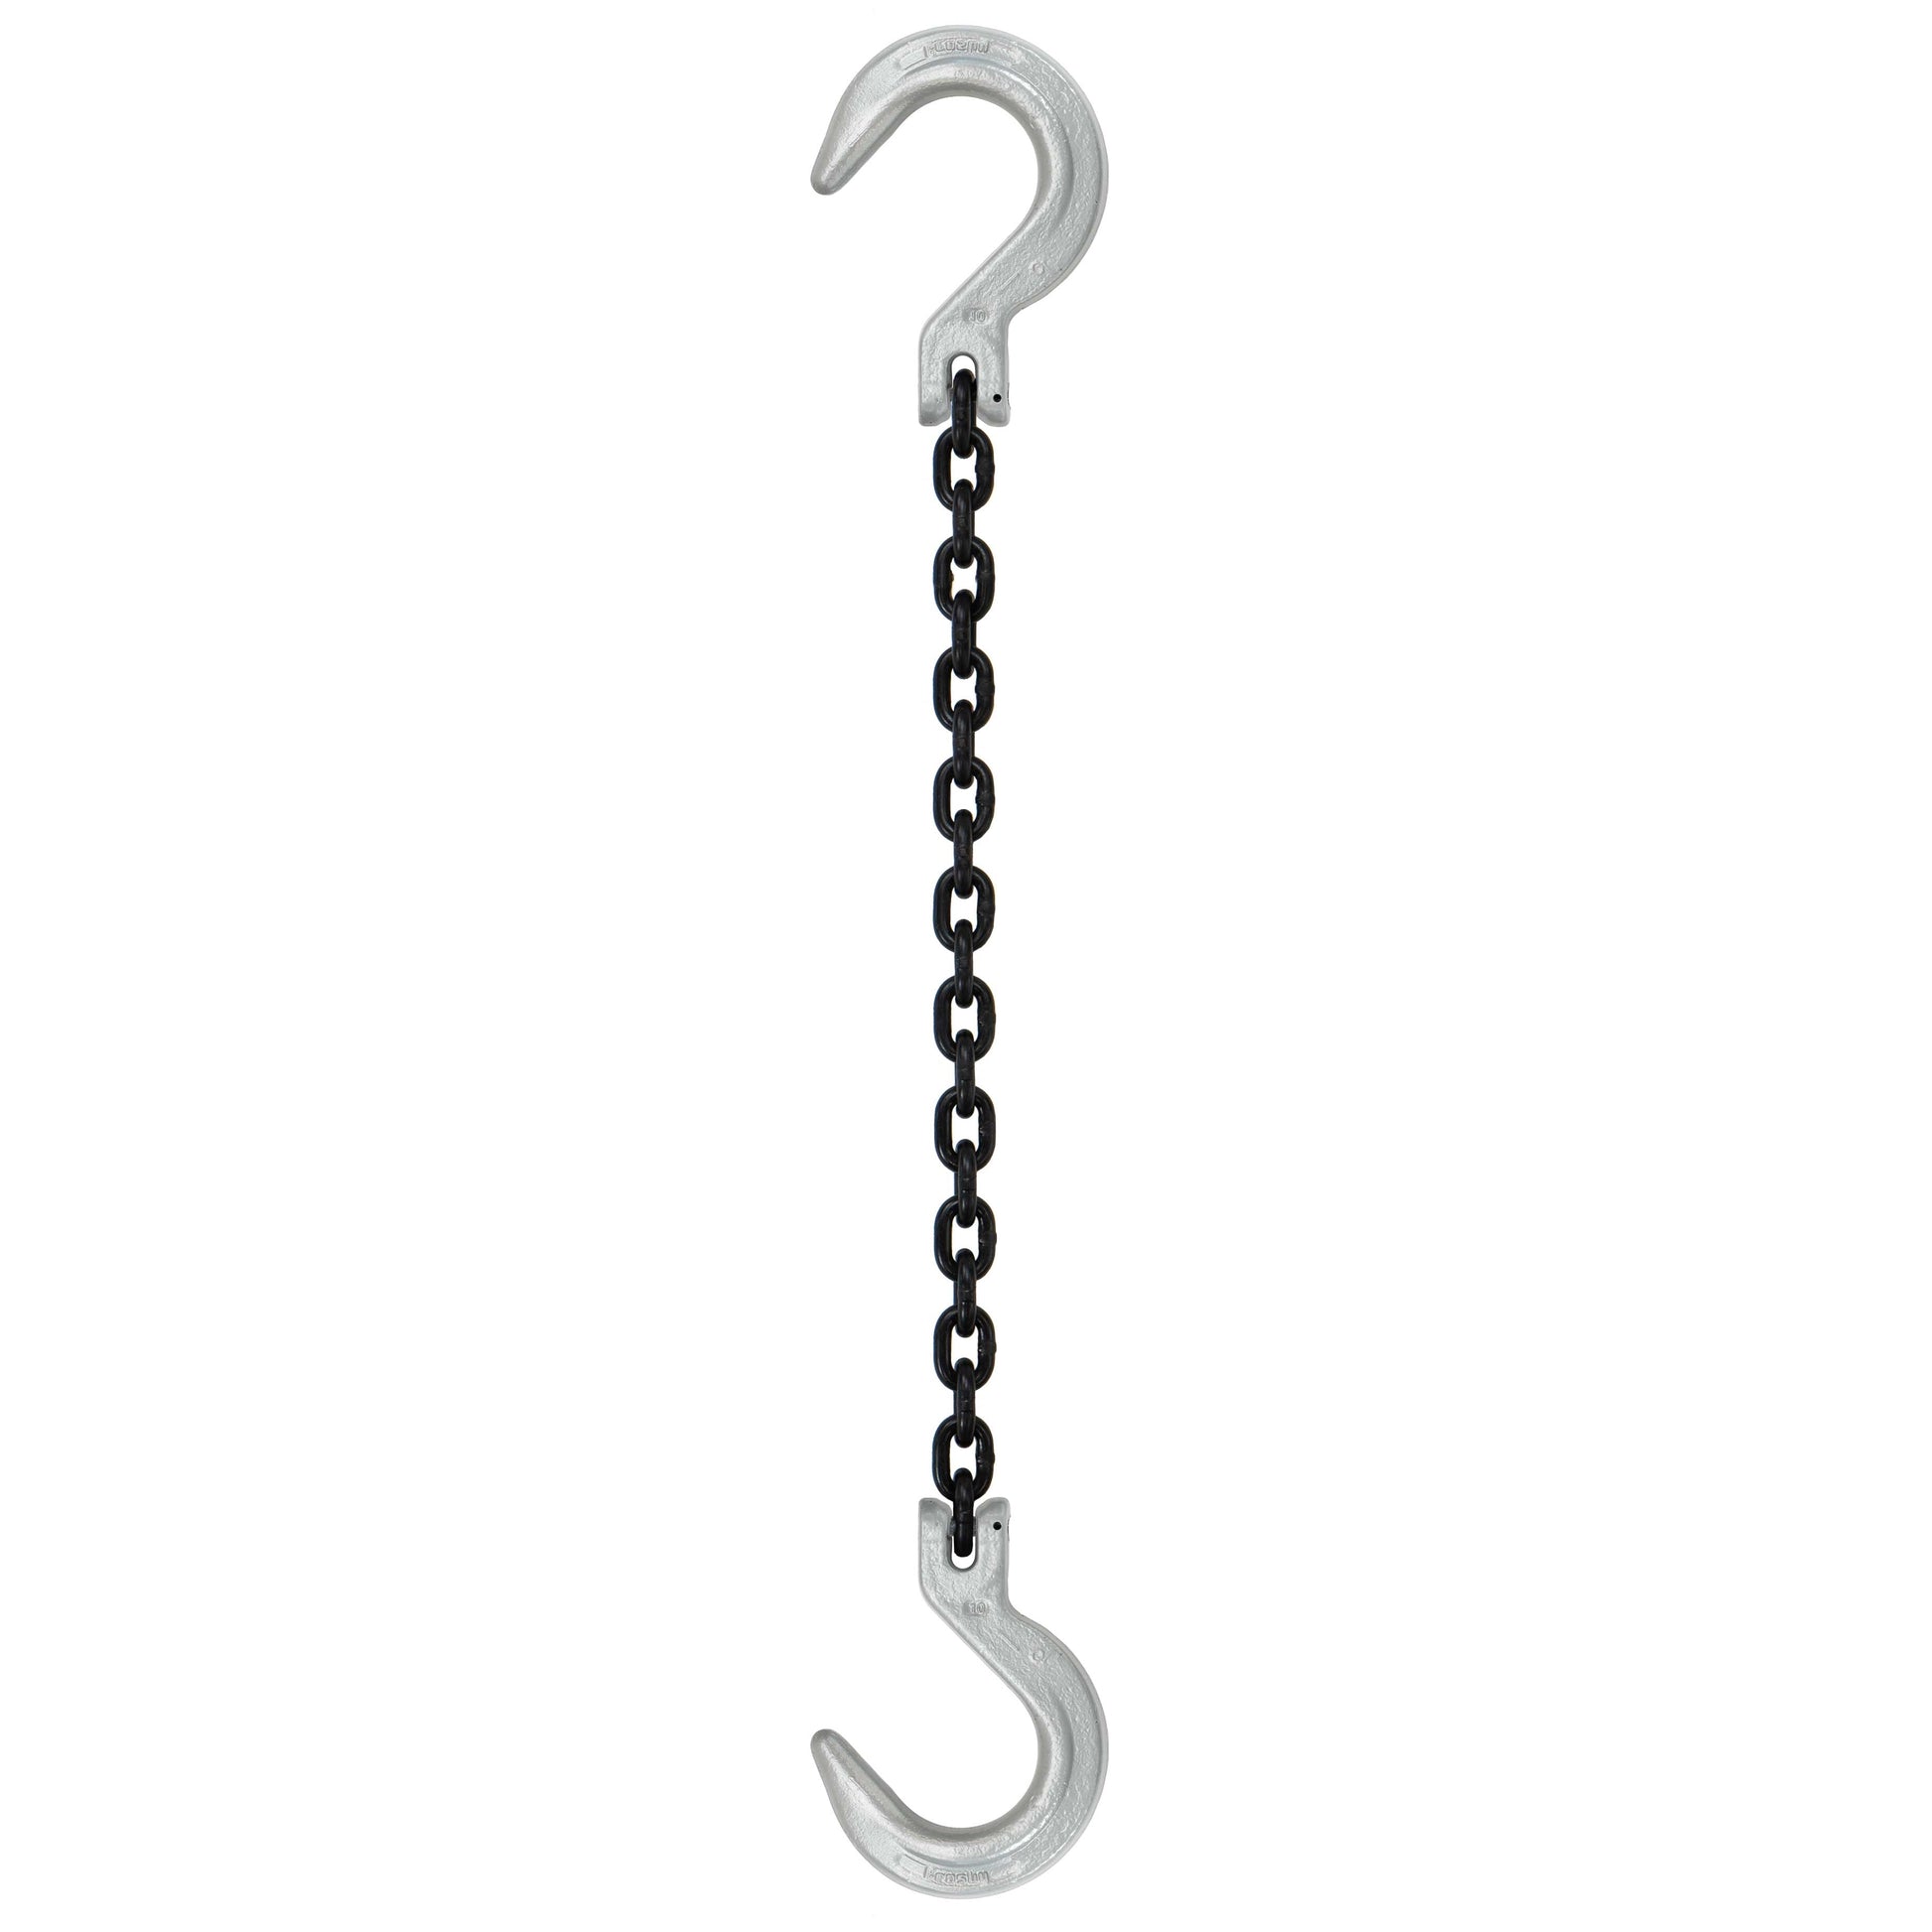 932 inch x 3 foot Domestic Single Leg Chain Sling w Crosby Foundry & Foundry Hooks Grade 100 image 1 of 2